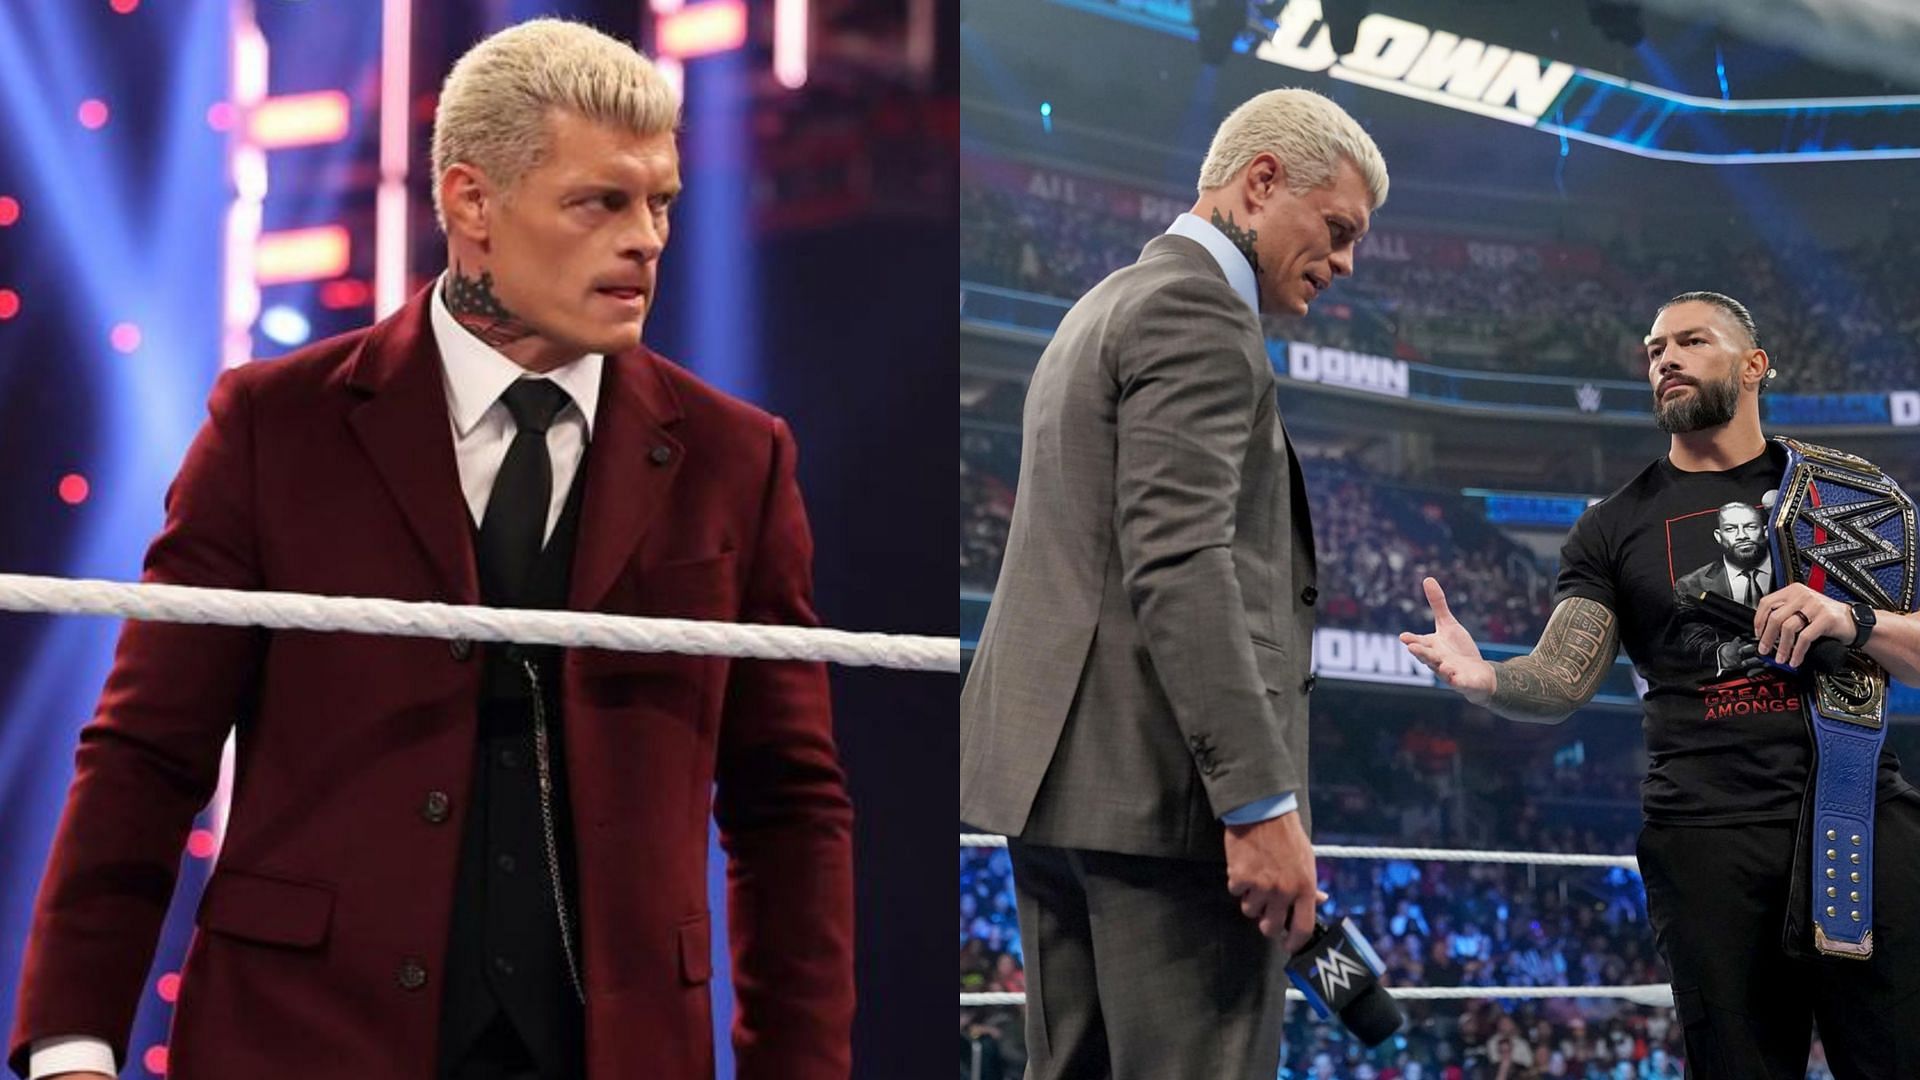 Cody Rhodes will face Roman Reigns at WWE WrestleMania 39